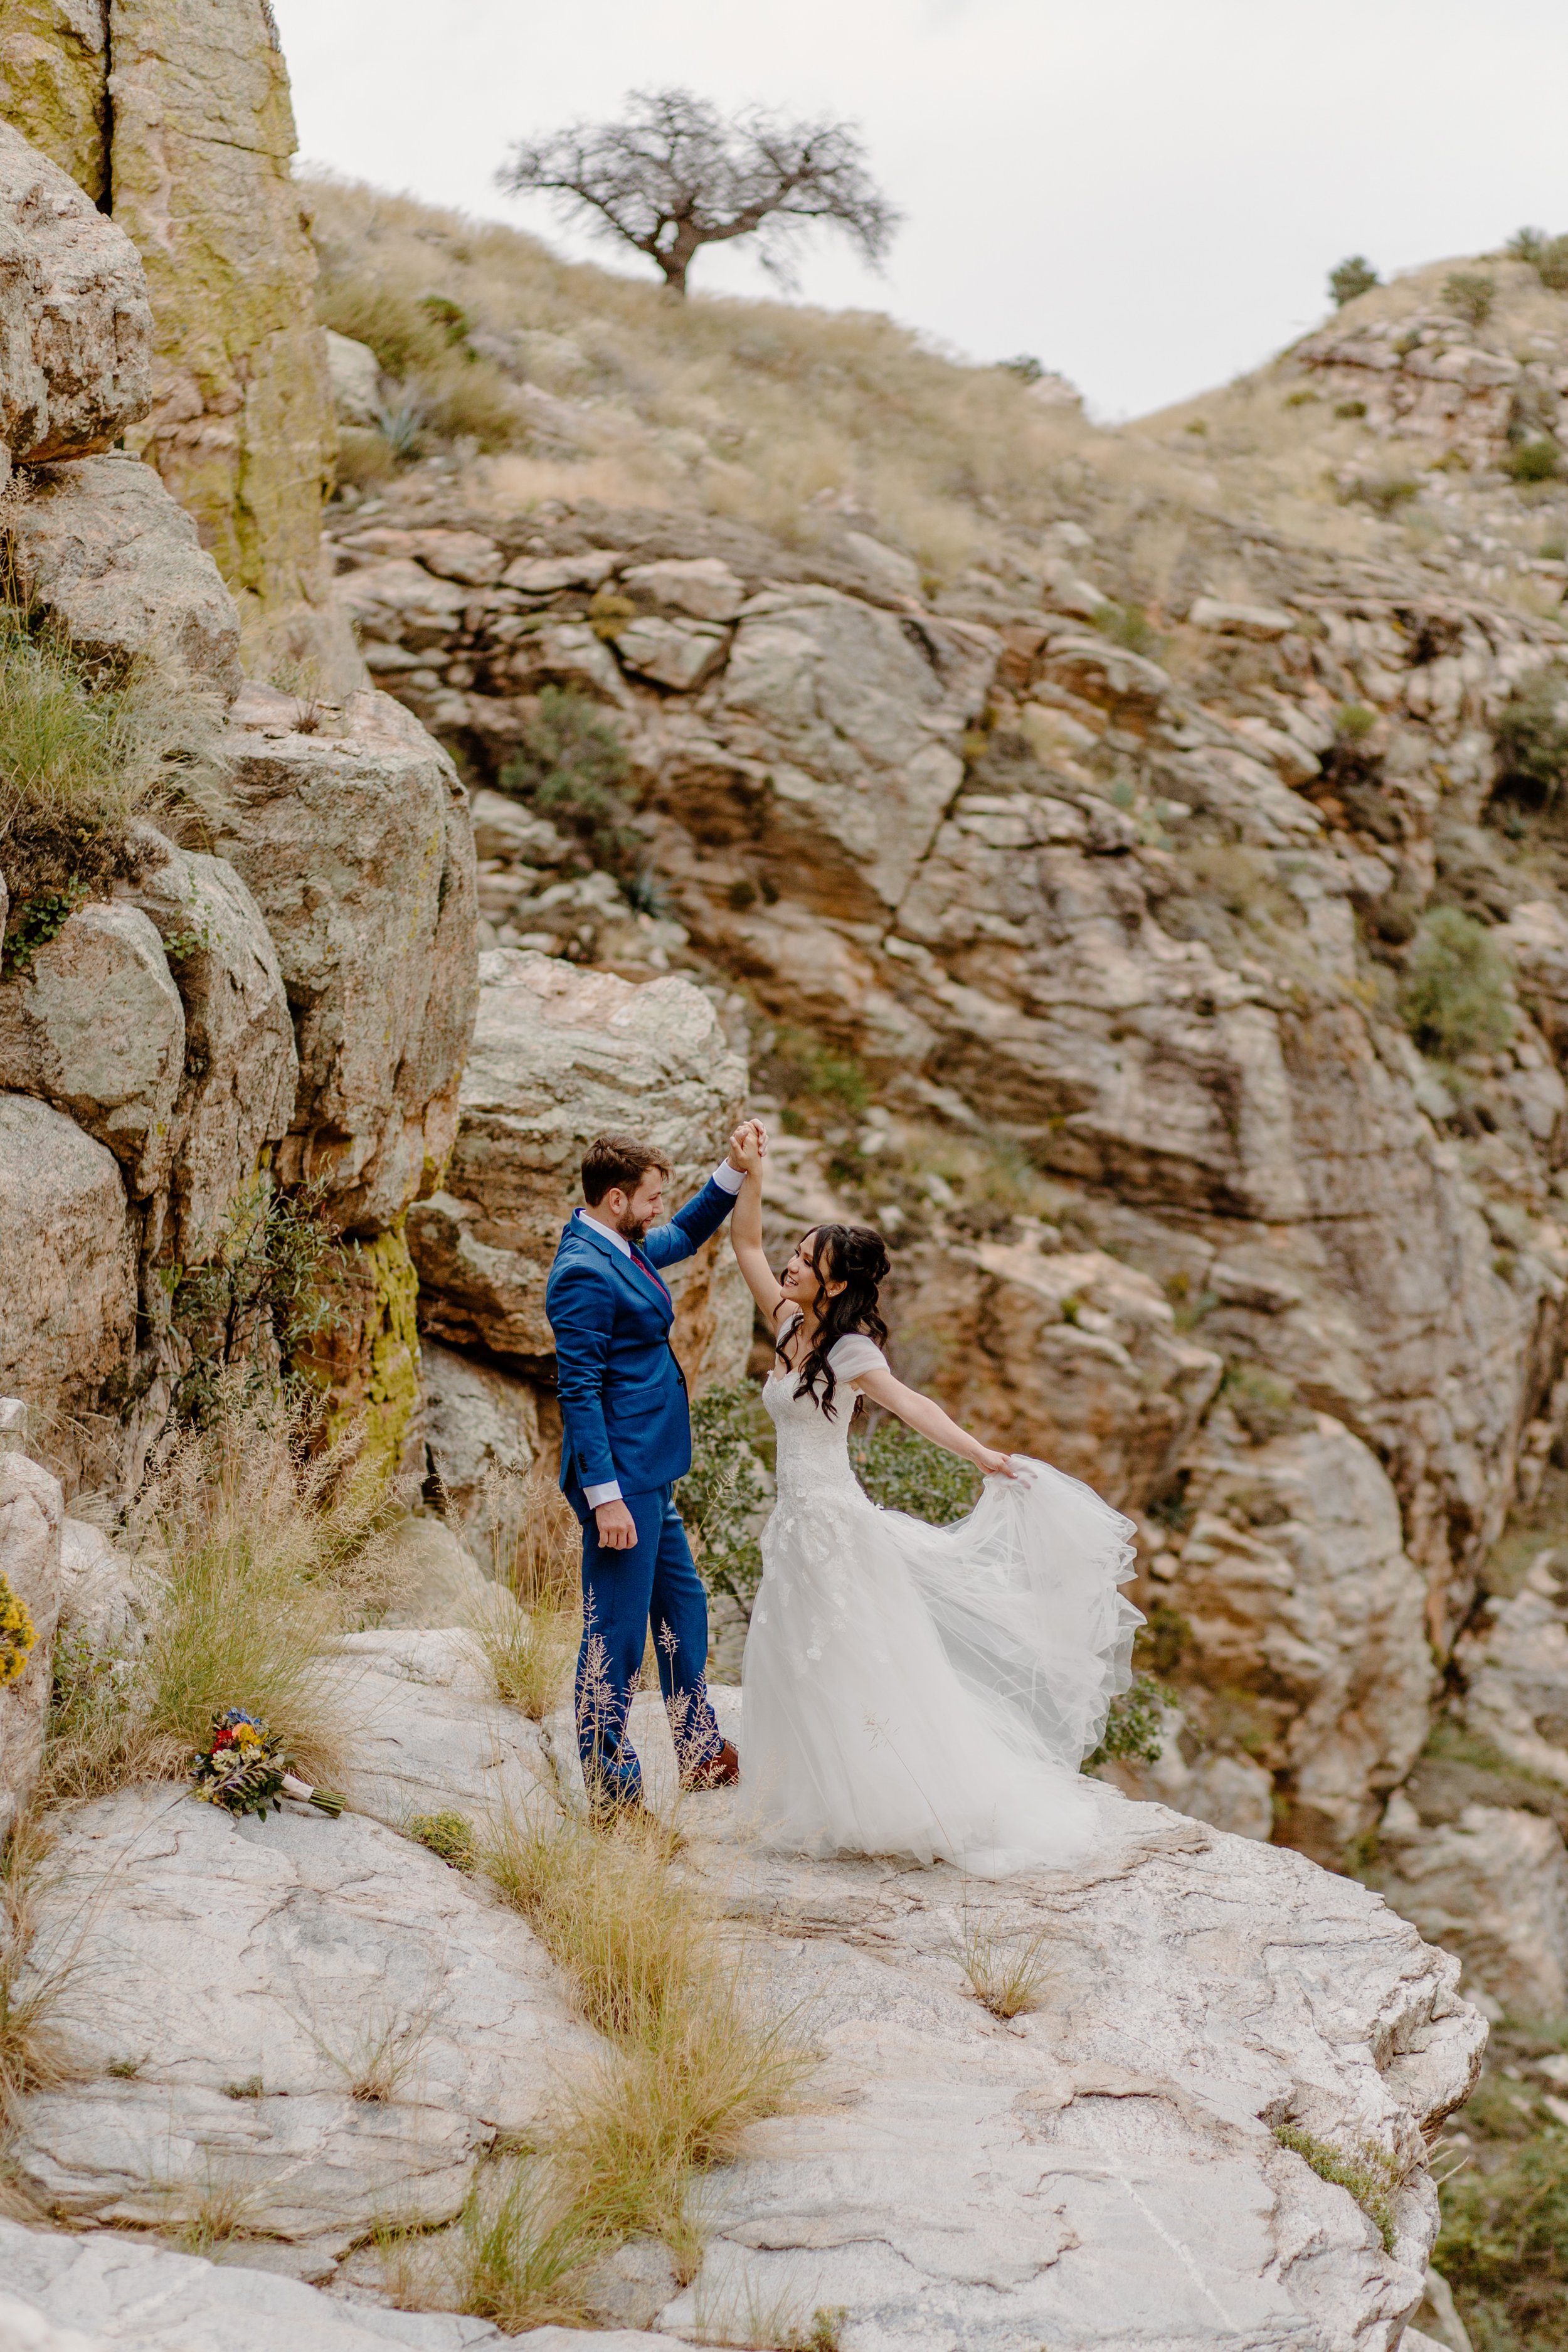  bride holding train standing on the rocks of desert canyon by Lucy bouman photo  